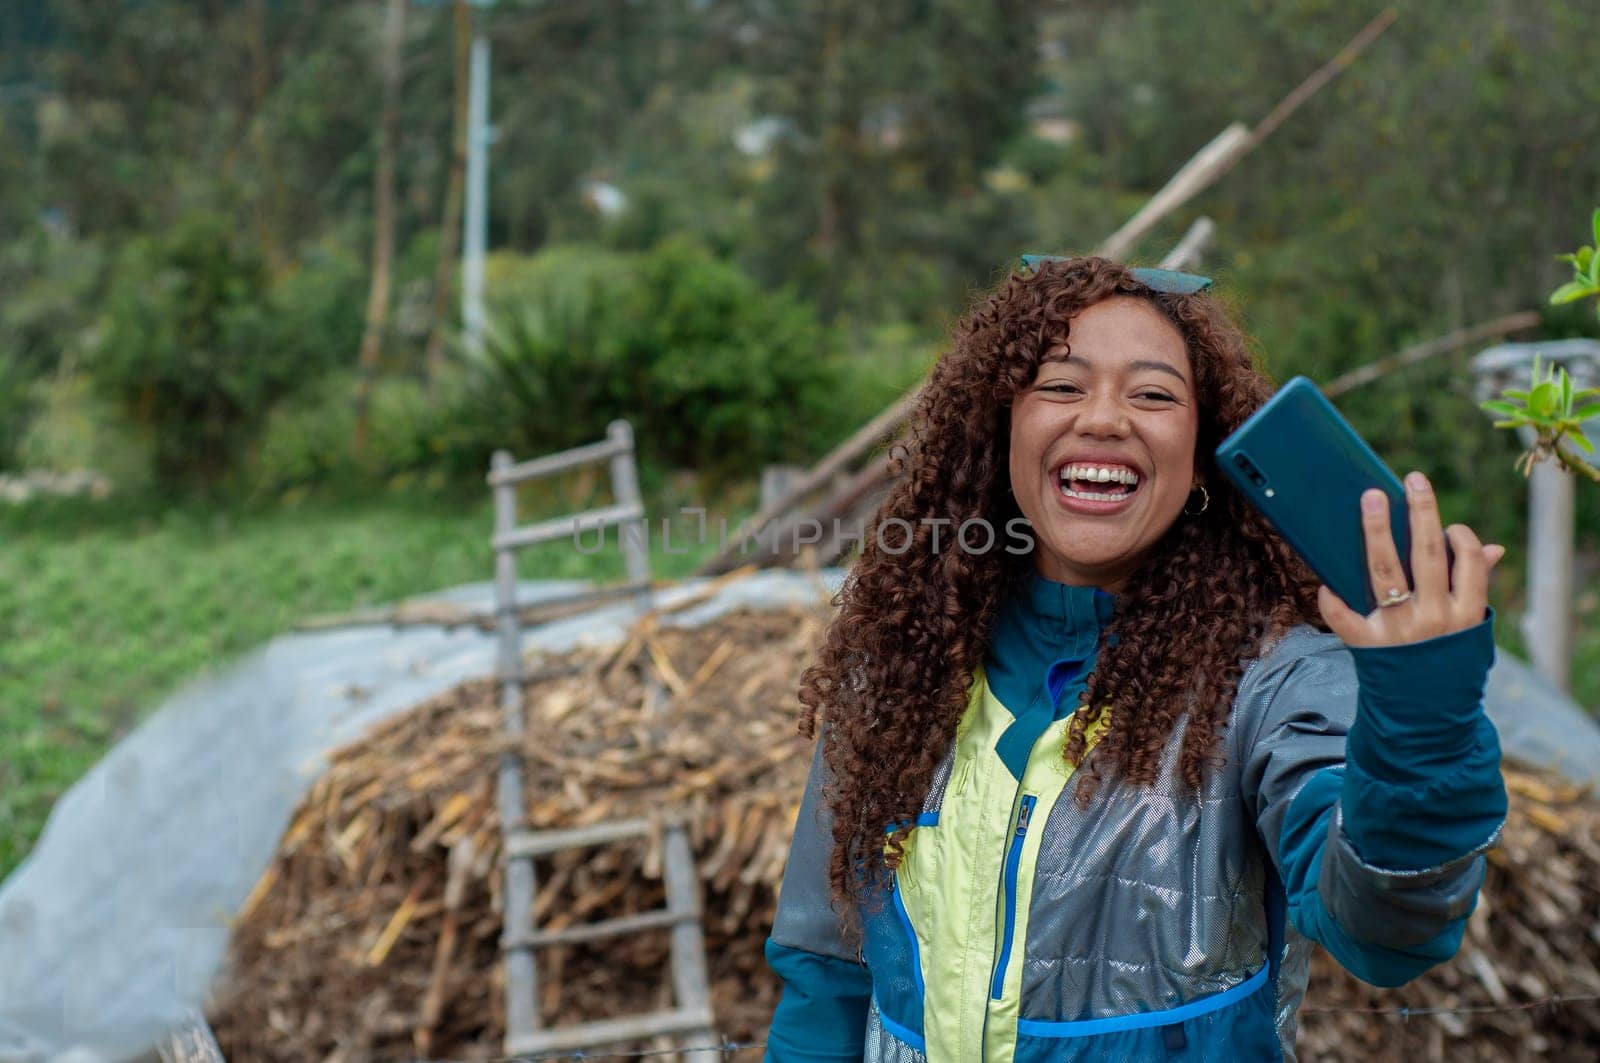 young girl from ecuador very smiling showing her followers a rural house with straw and a ladder made of wood. by Raulmartin